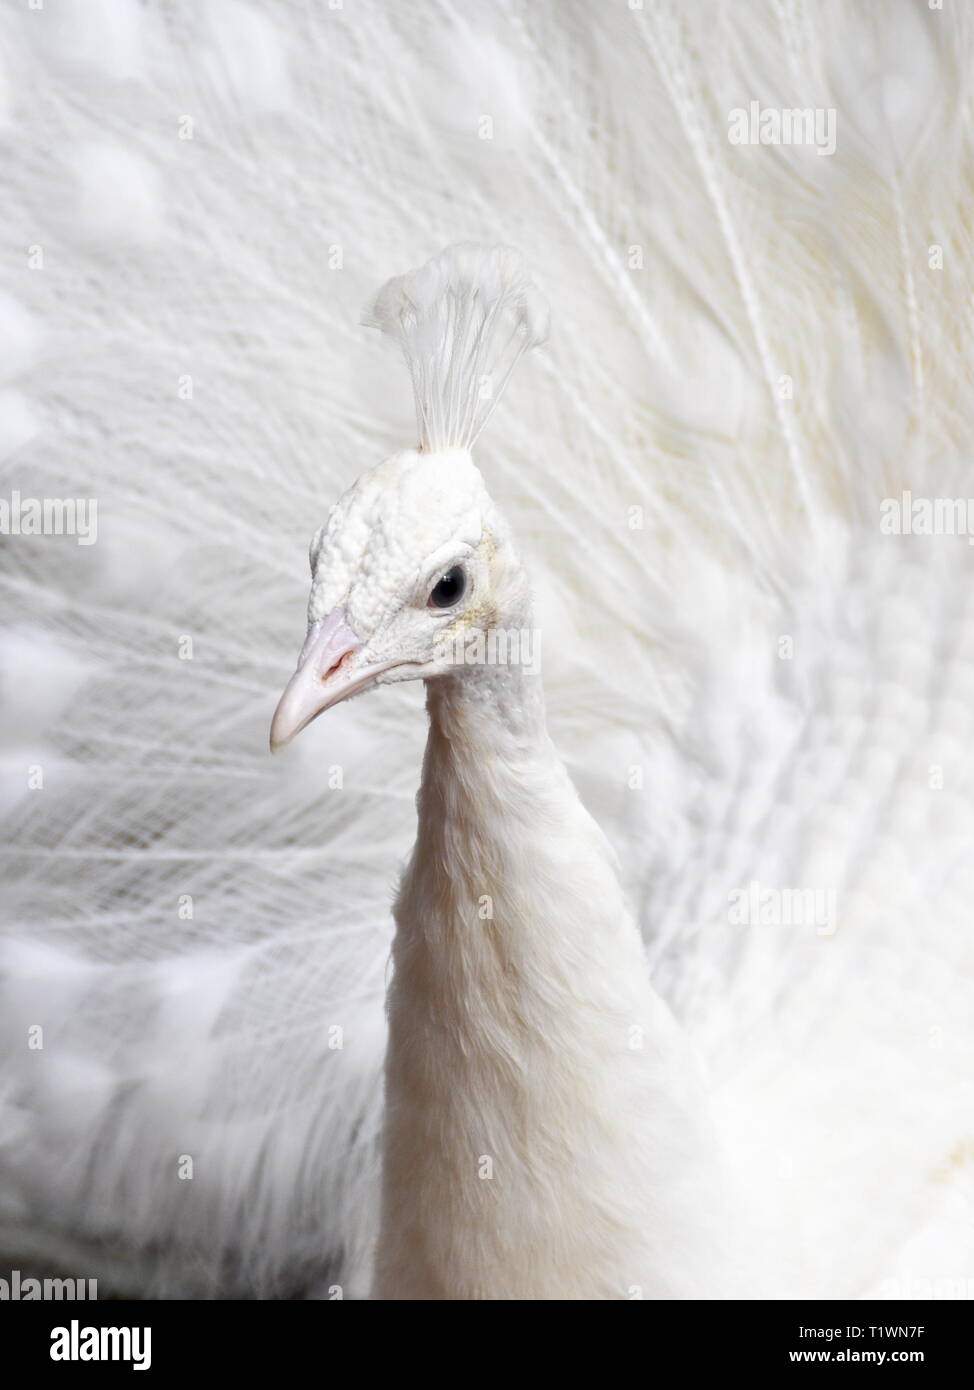 White leucistic peacock spreading and displaying his feathers Stock Photo